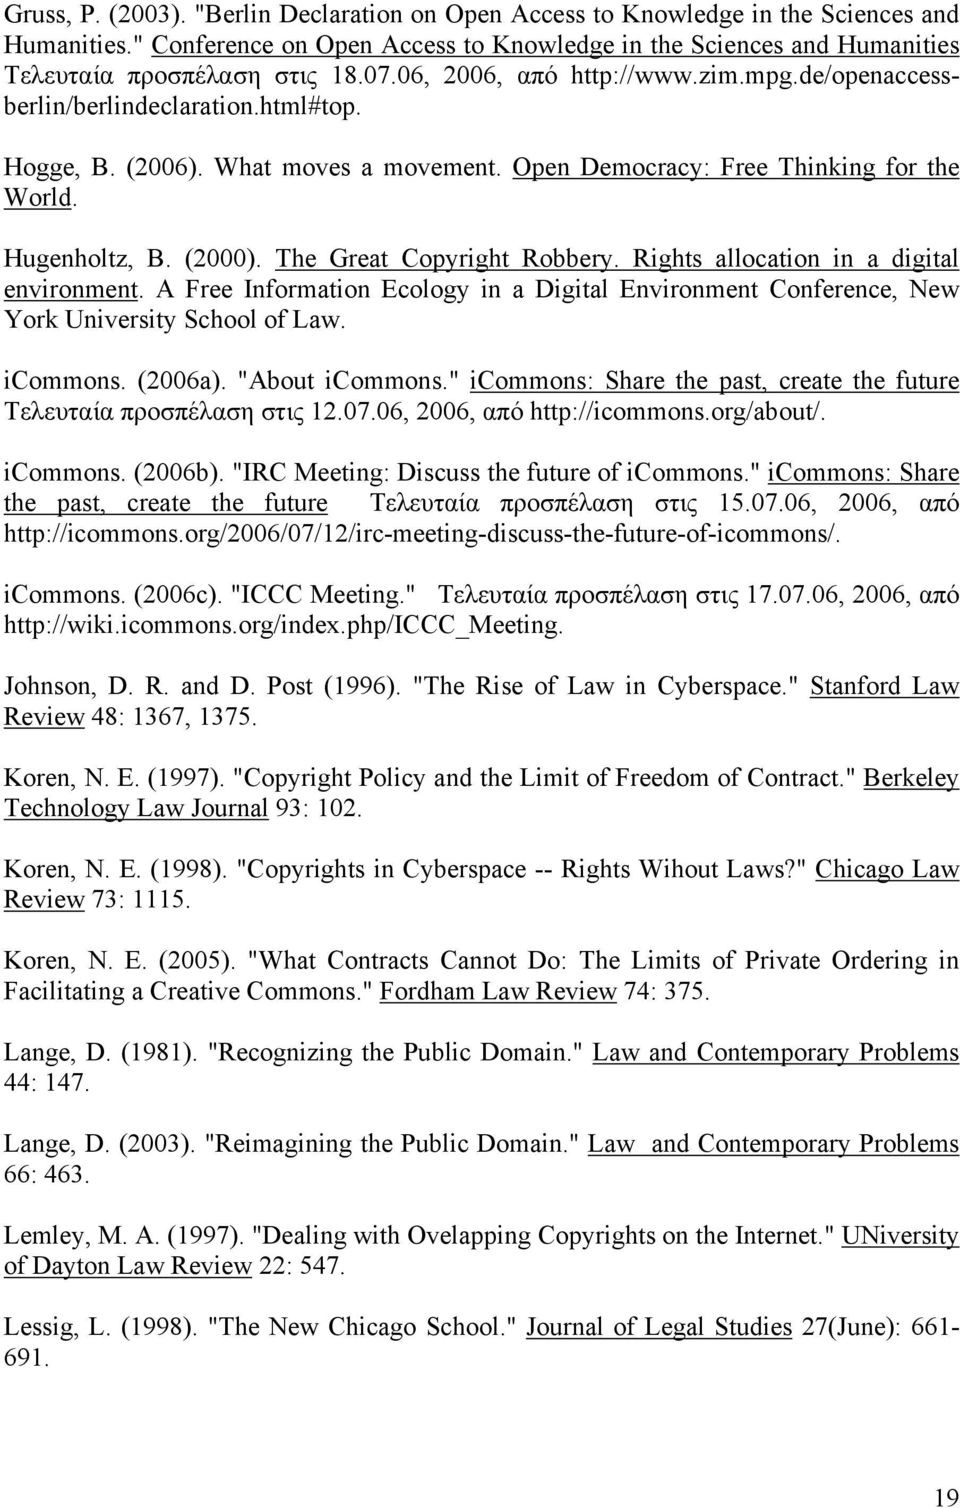 The Great Copyright Robbery. Rights allocation in a digital environment. A Free Information Ecology in a Digital Environment Conference, New York University School of Law. icommons. (2006a).